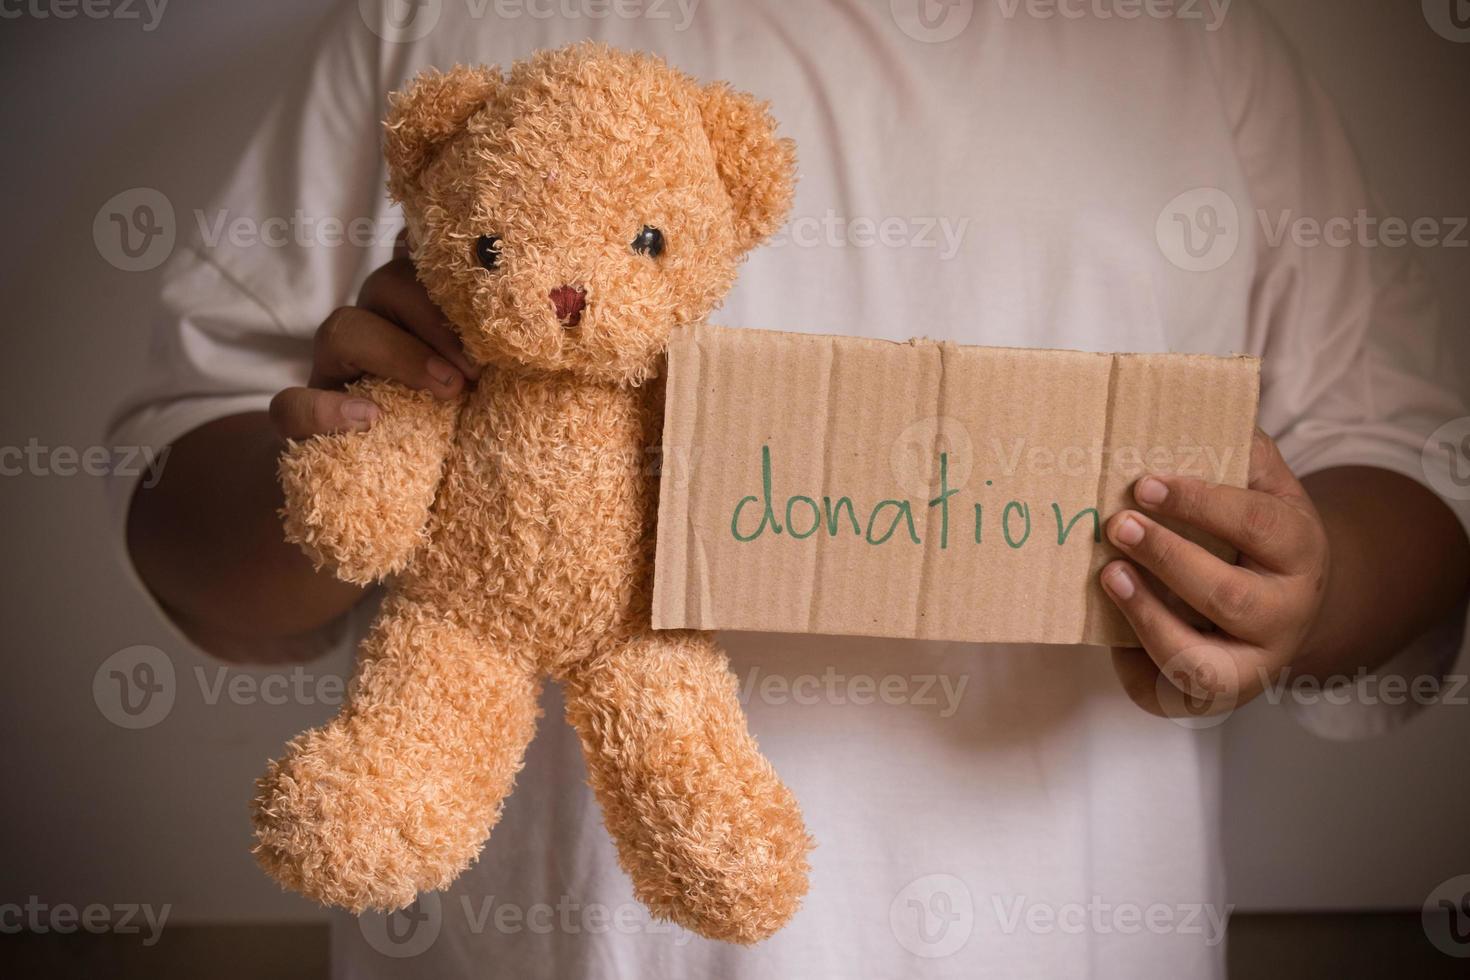 Male hand holding teddy bear for donation photo